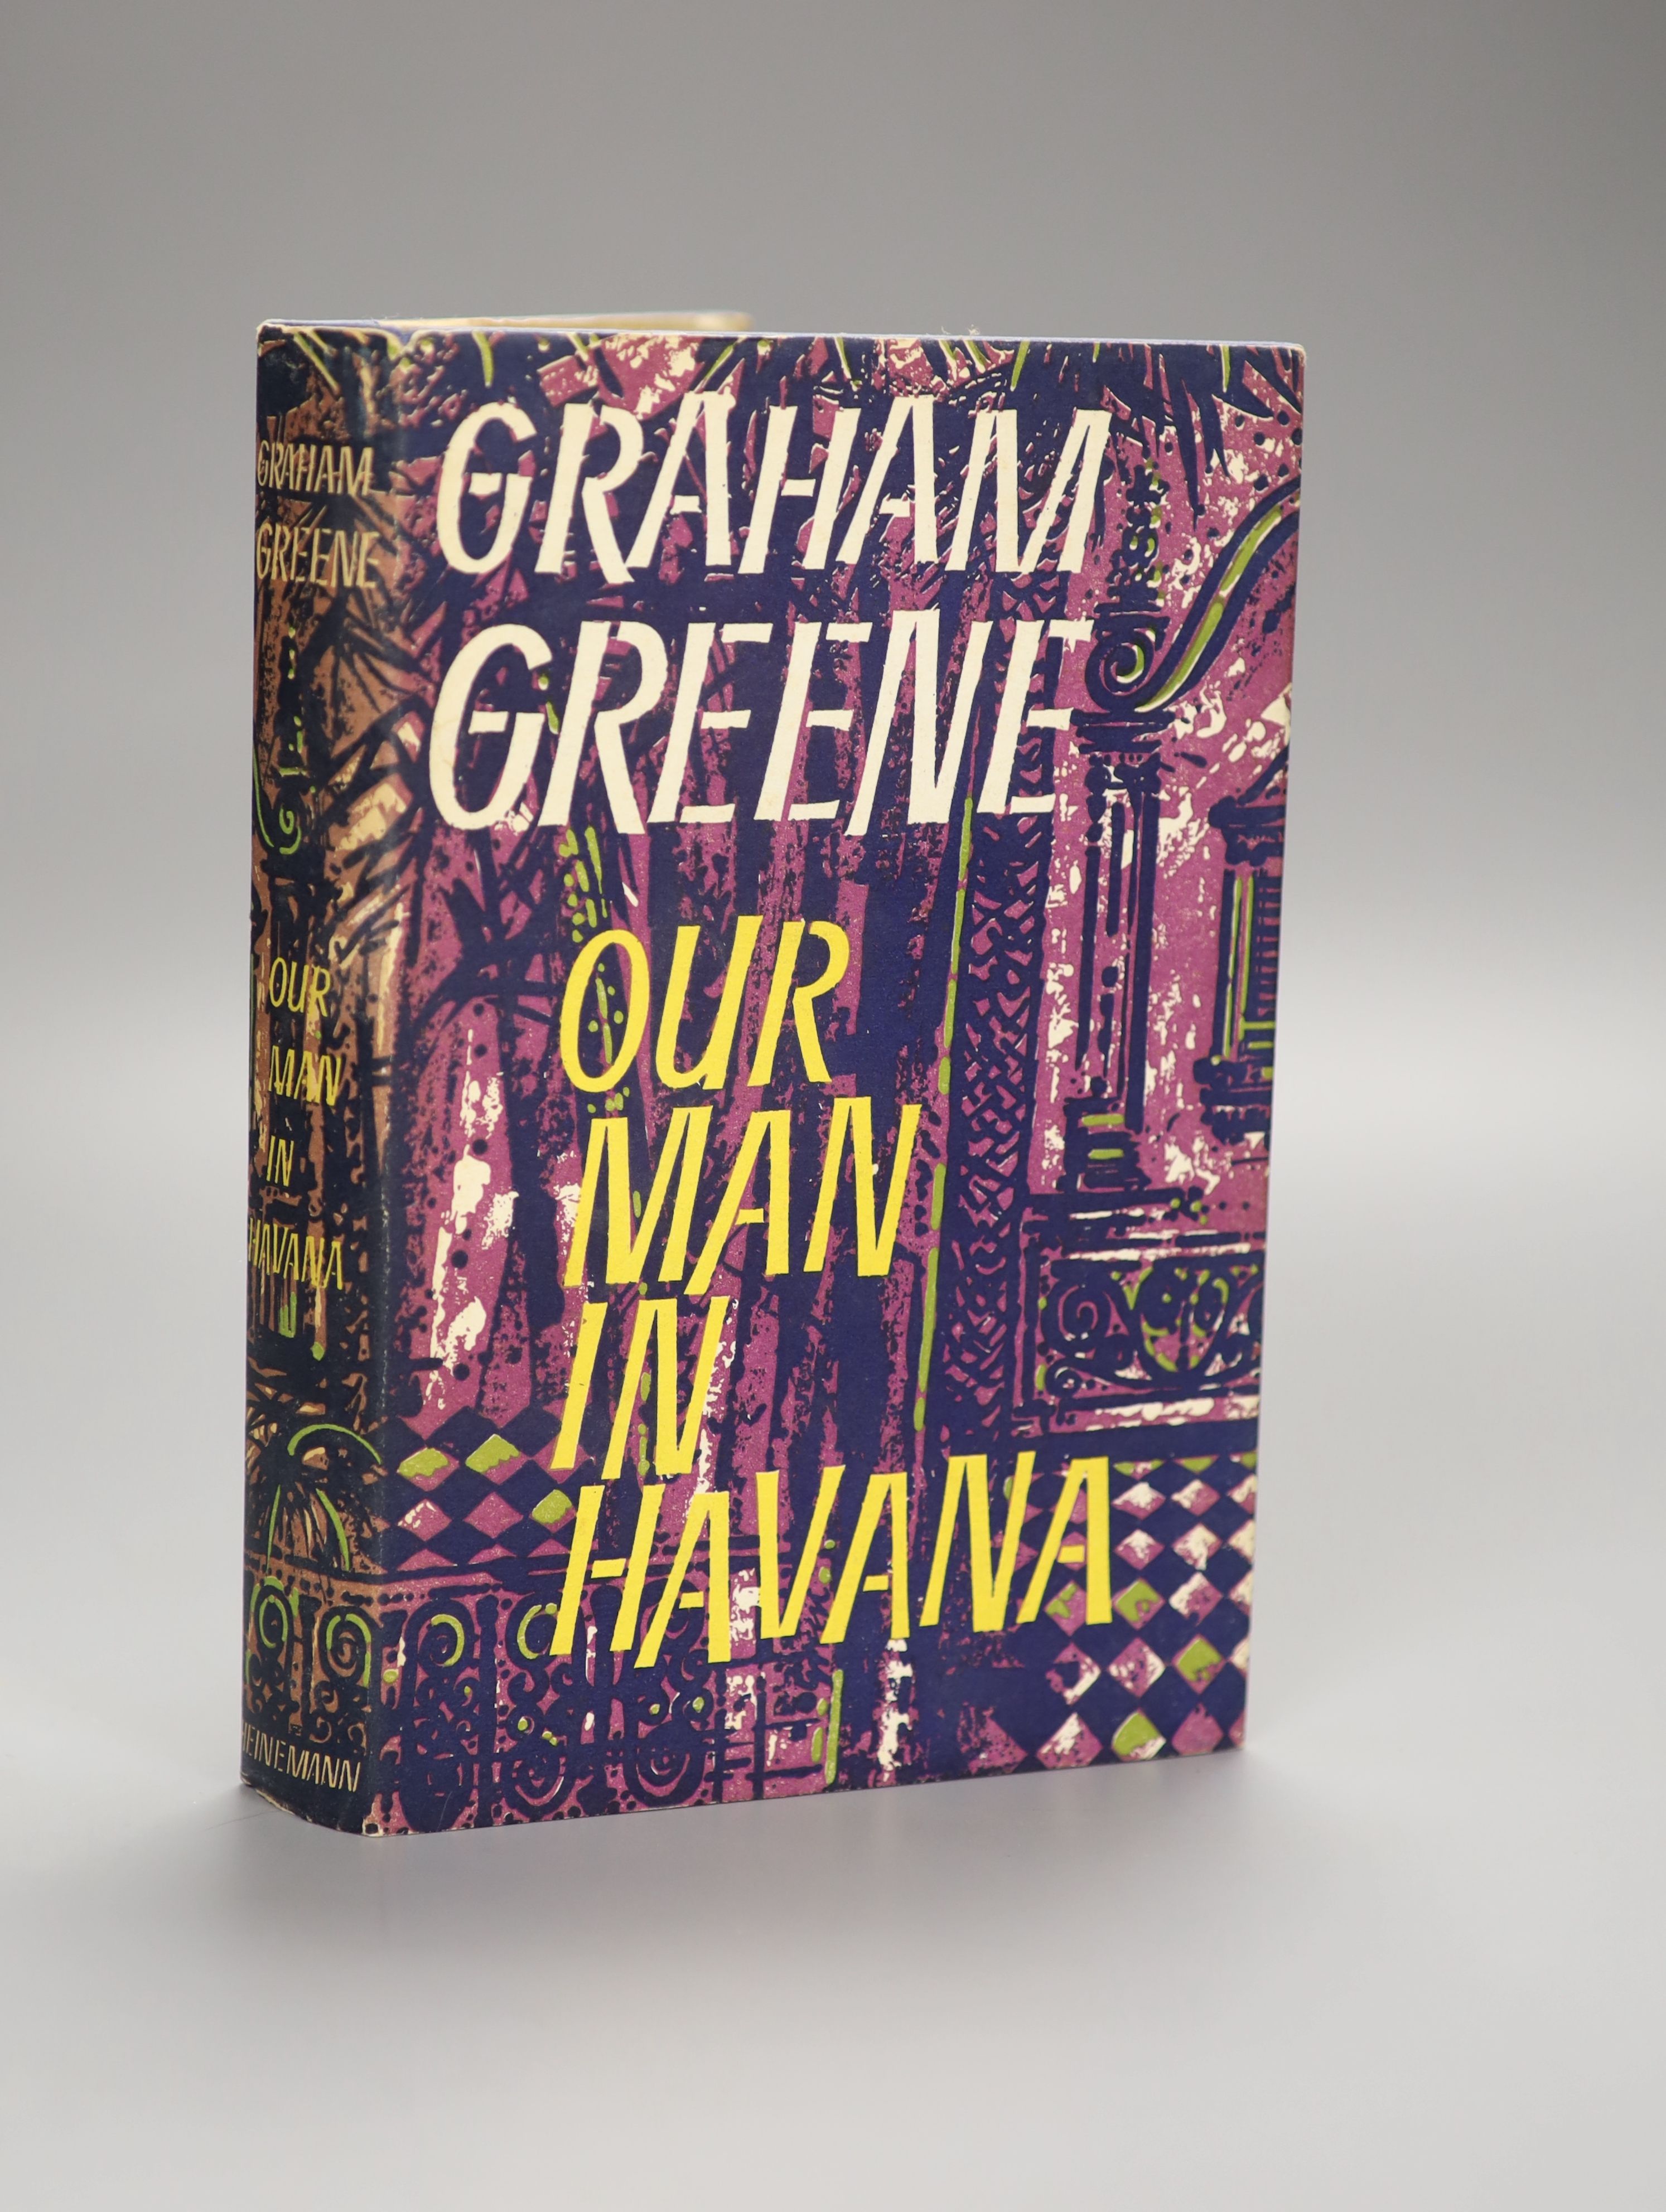 Greene, Graham - Our Man in Havana, 1st edition, in original blue cloth with unclipped d/j, soiled on rear panel, William Heinemann, London, 1958